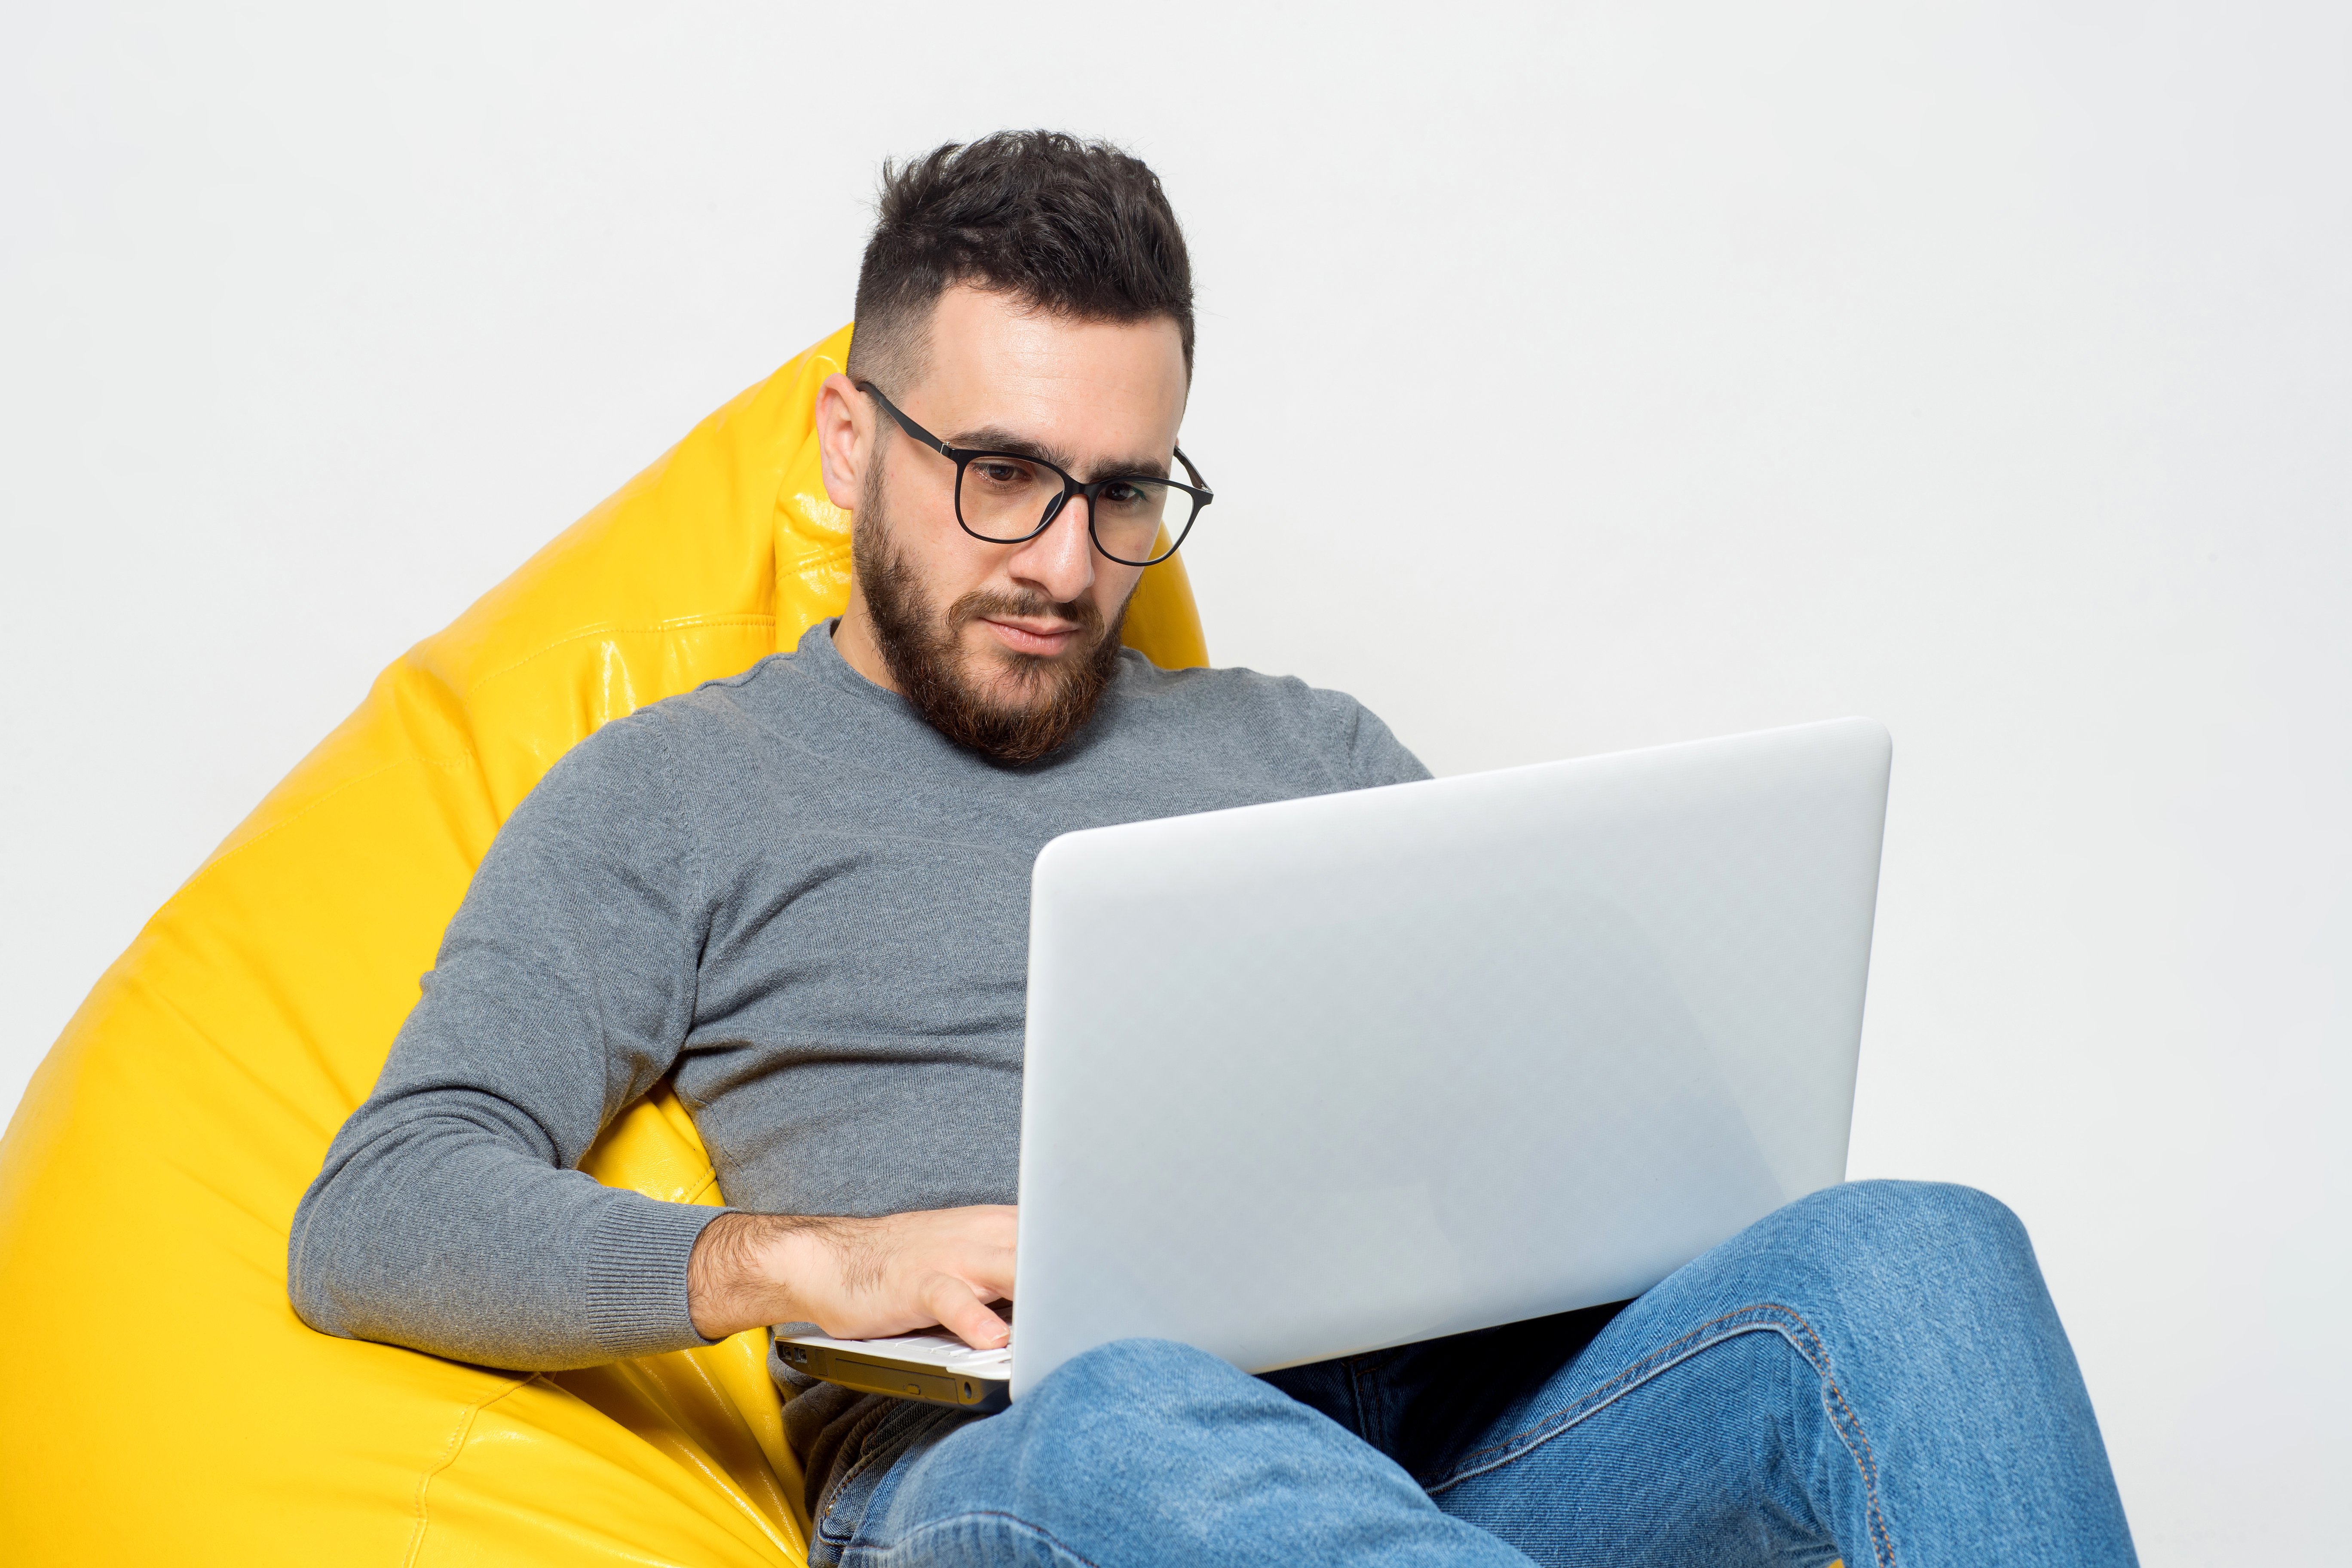 guy-works-with-laptop-while-sitting-yellow-pouf-chair